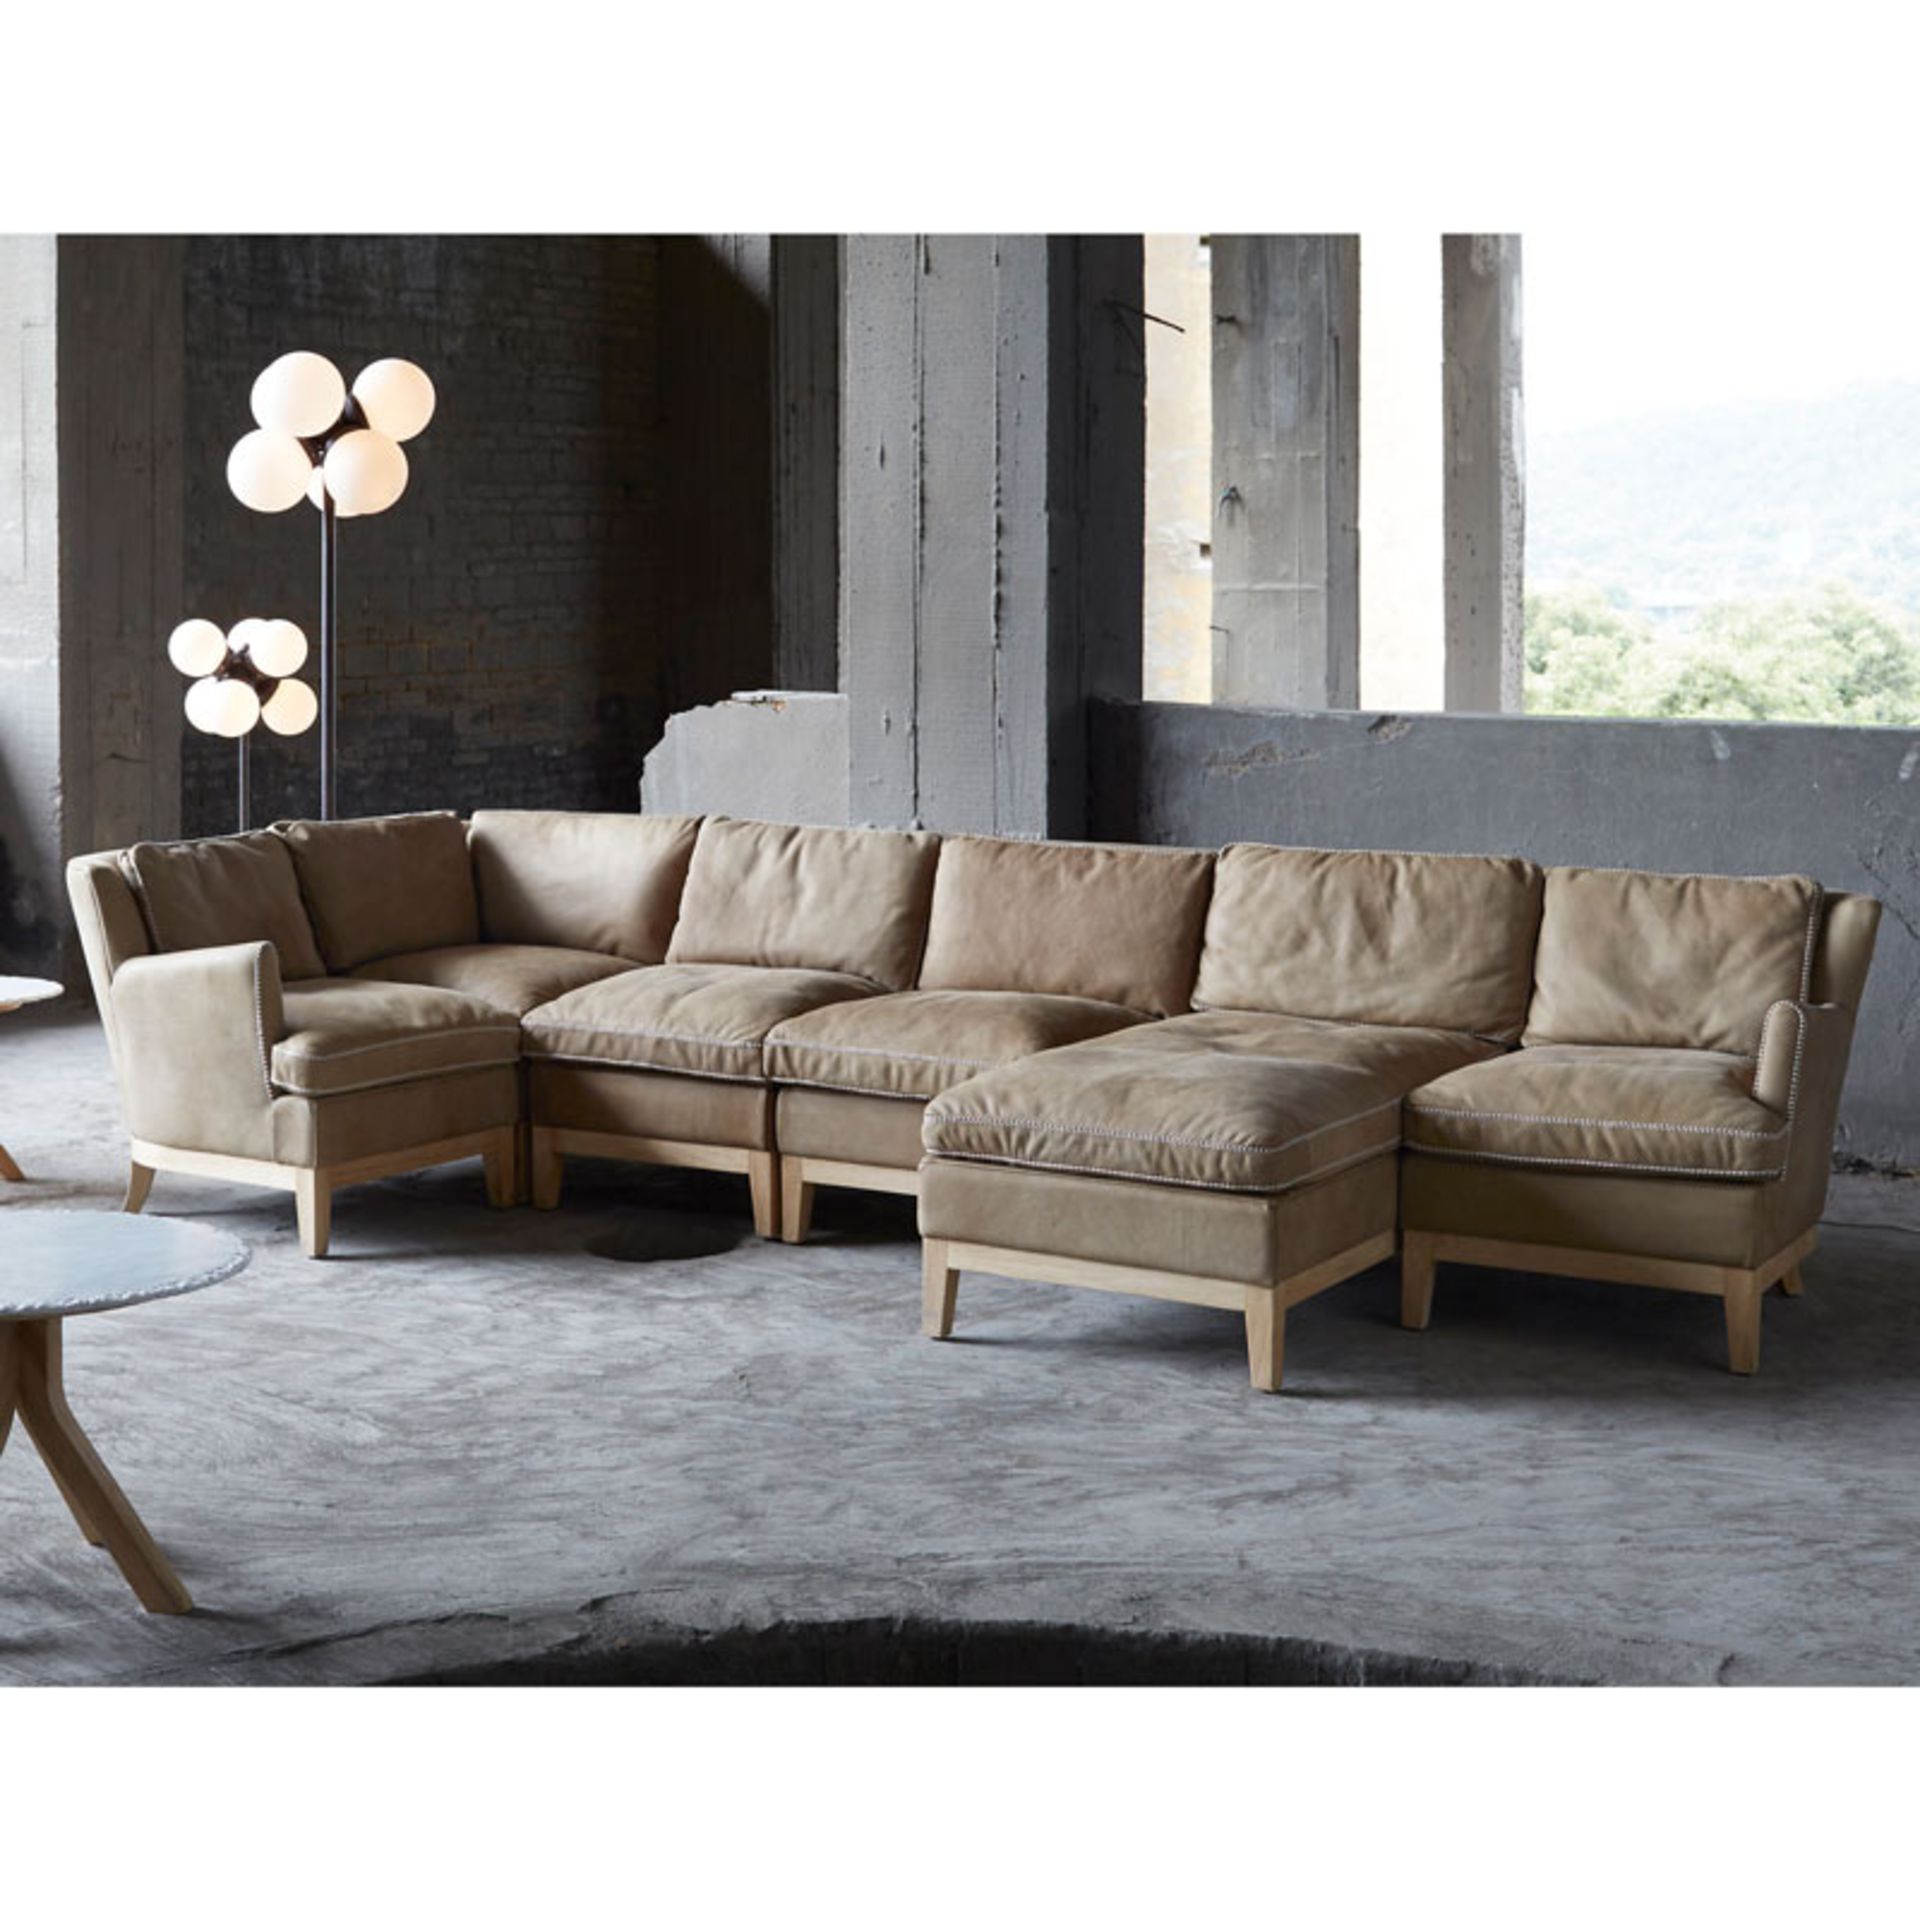 F300 Comoc Sectional Suite Comprising Of 1 Seater New Stitching Cheyen & Bn.Natural RRP £14480